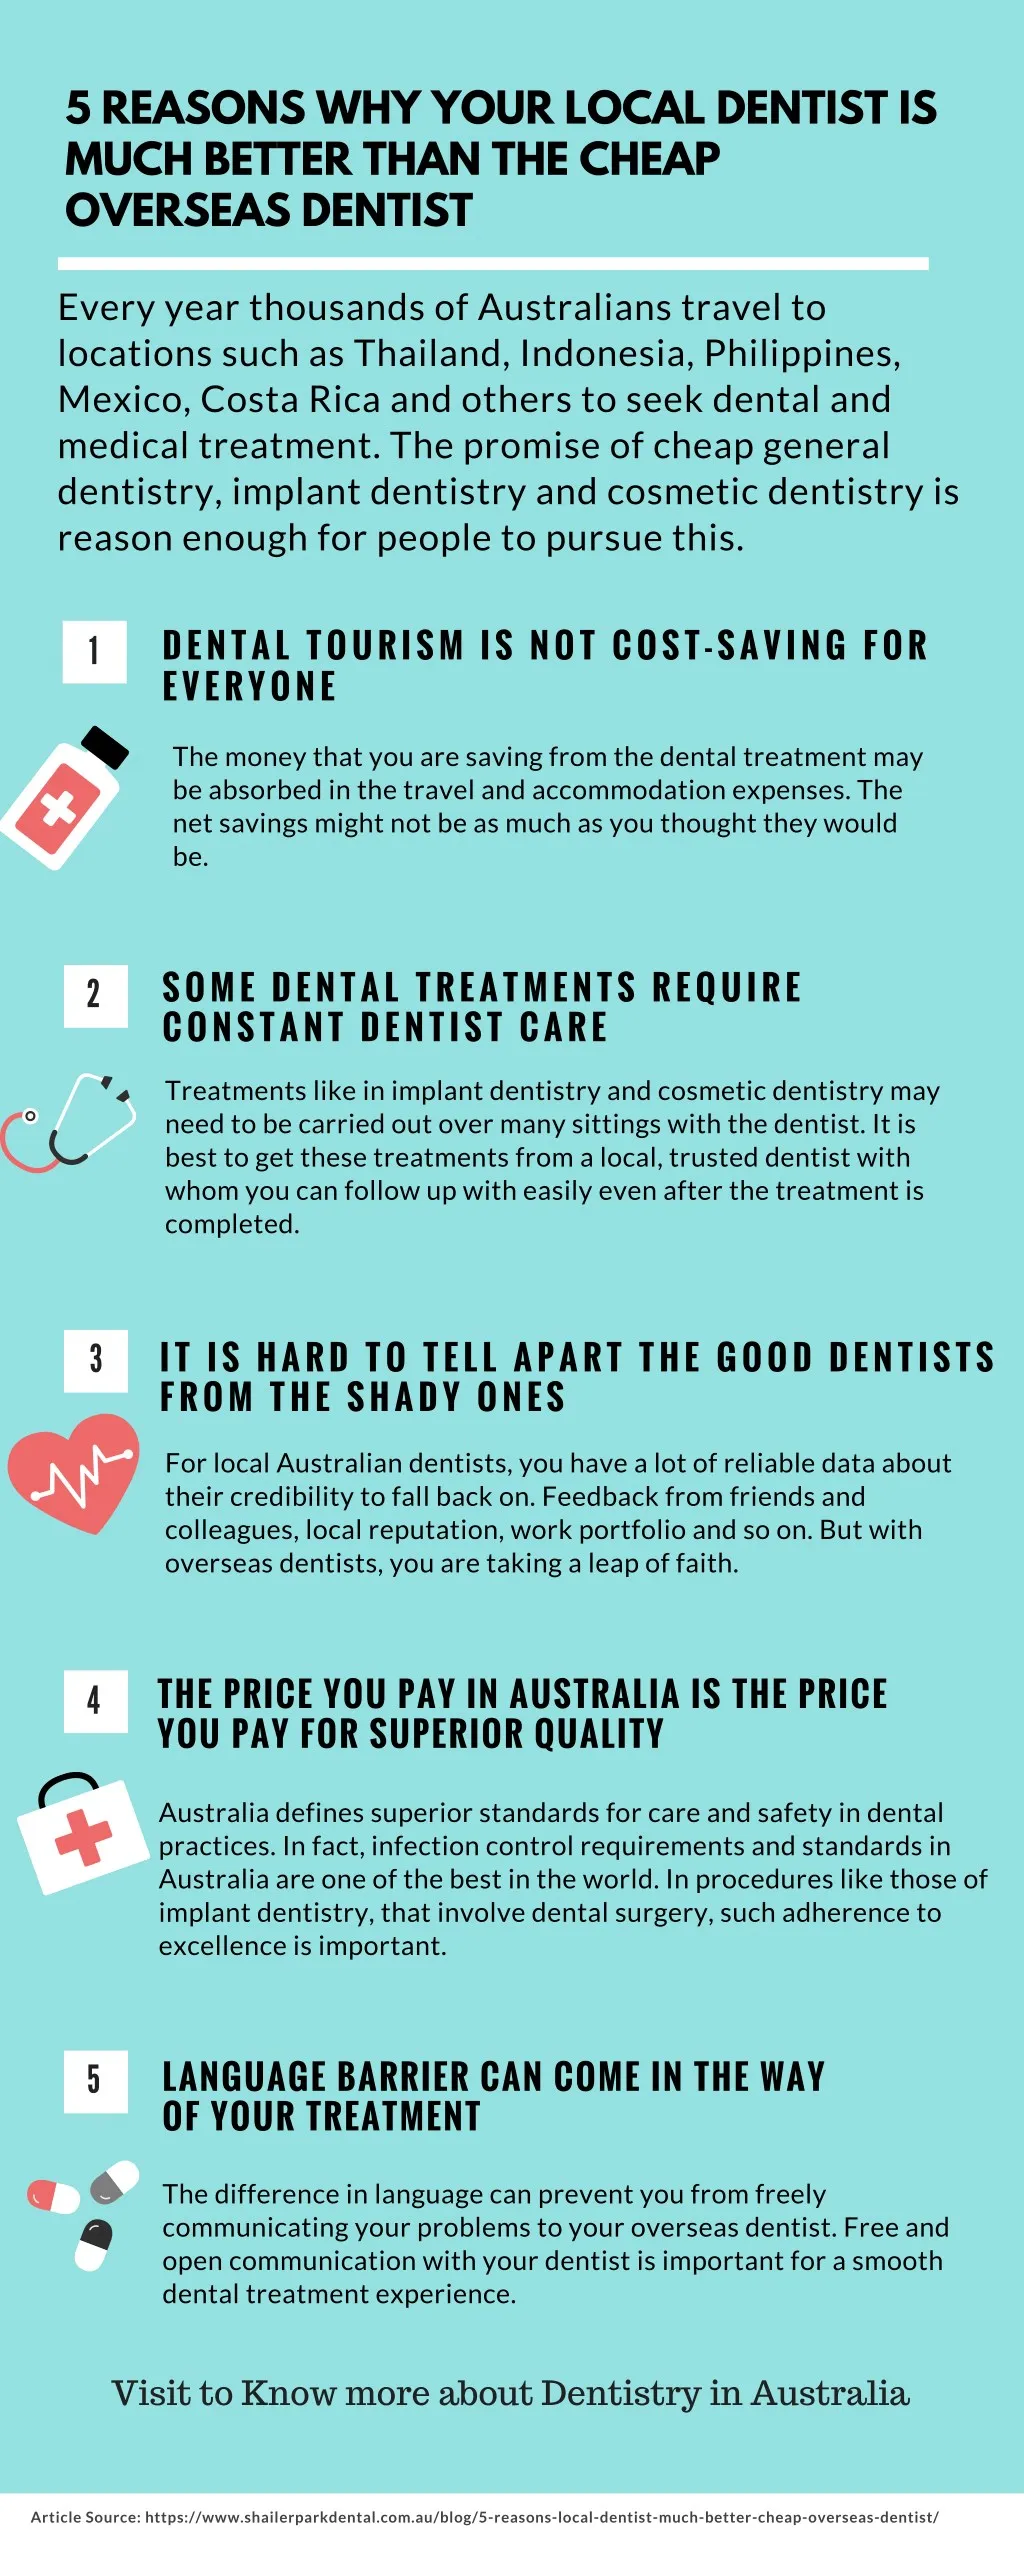 5 reasons why your local dentist is much better